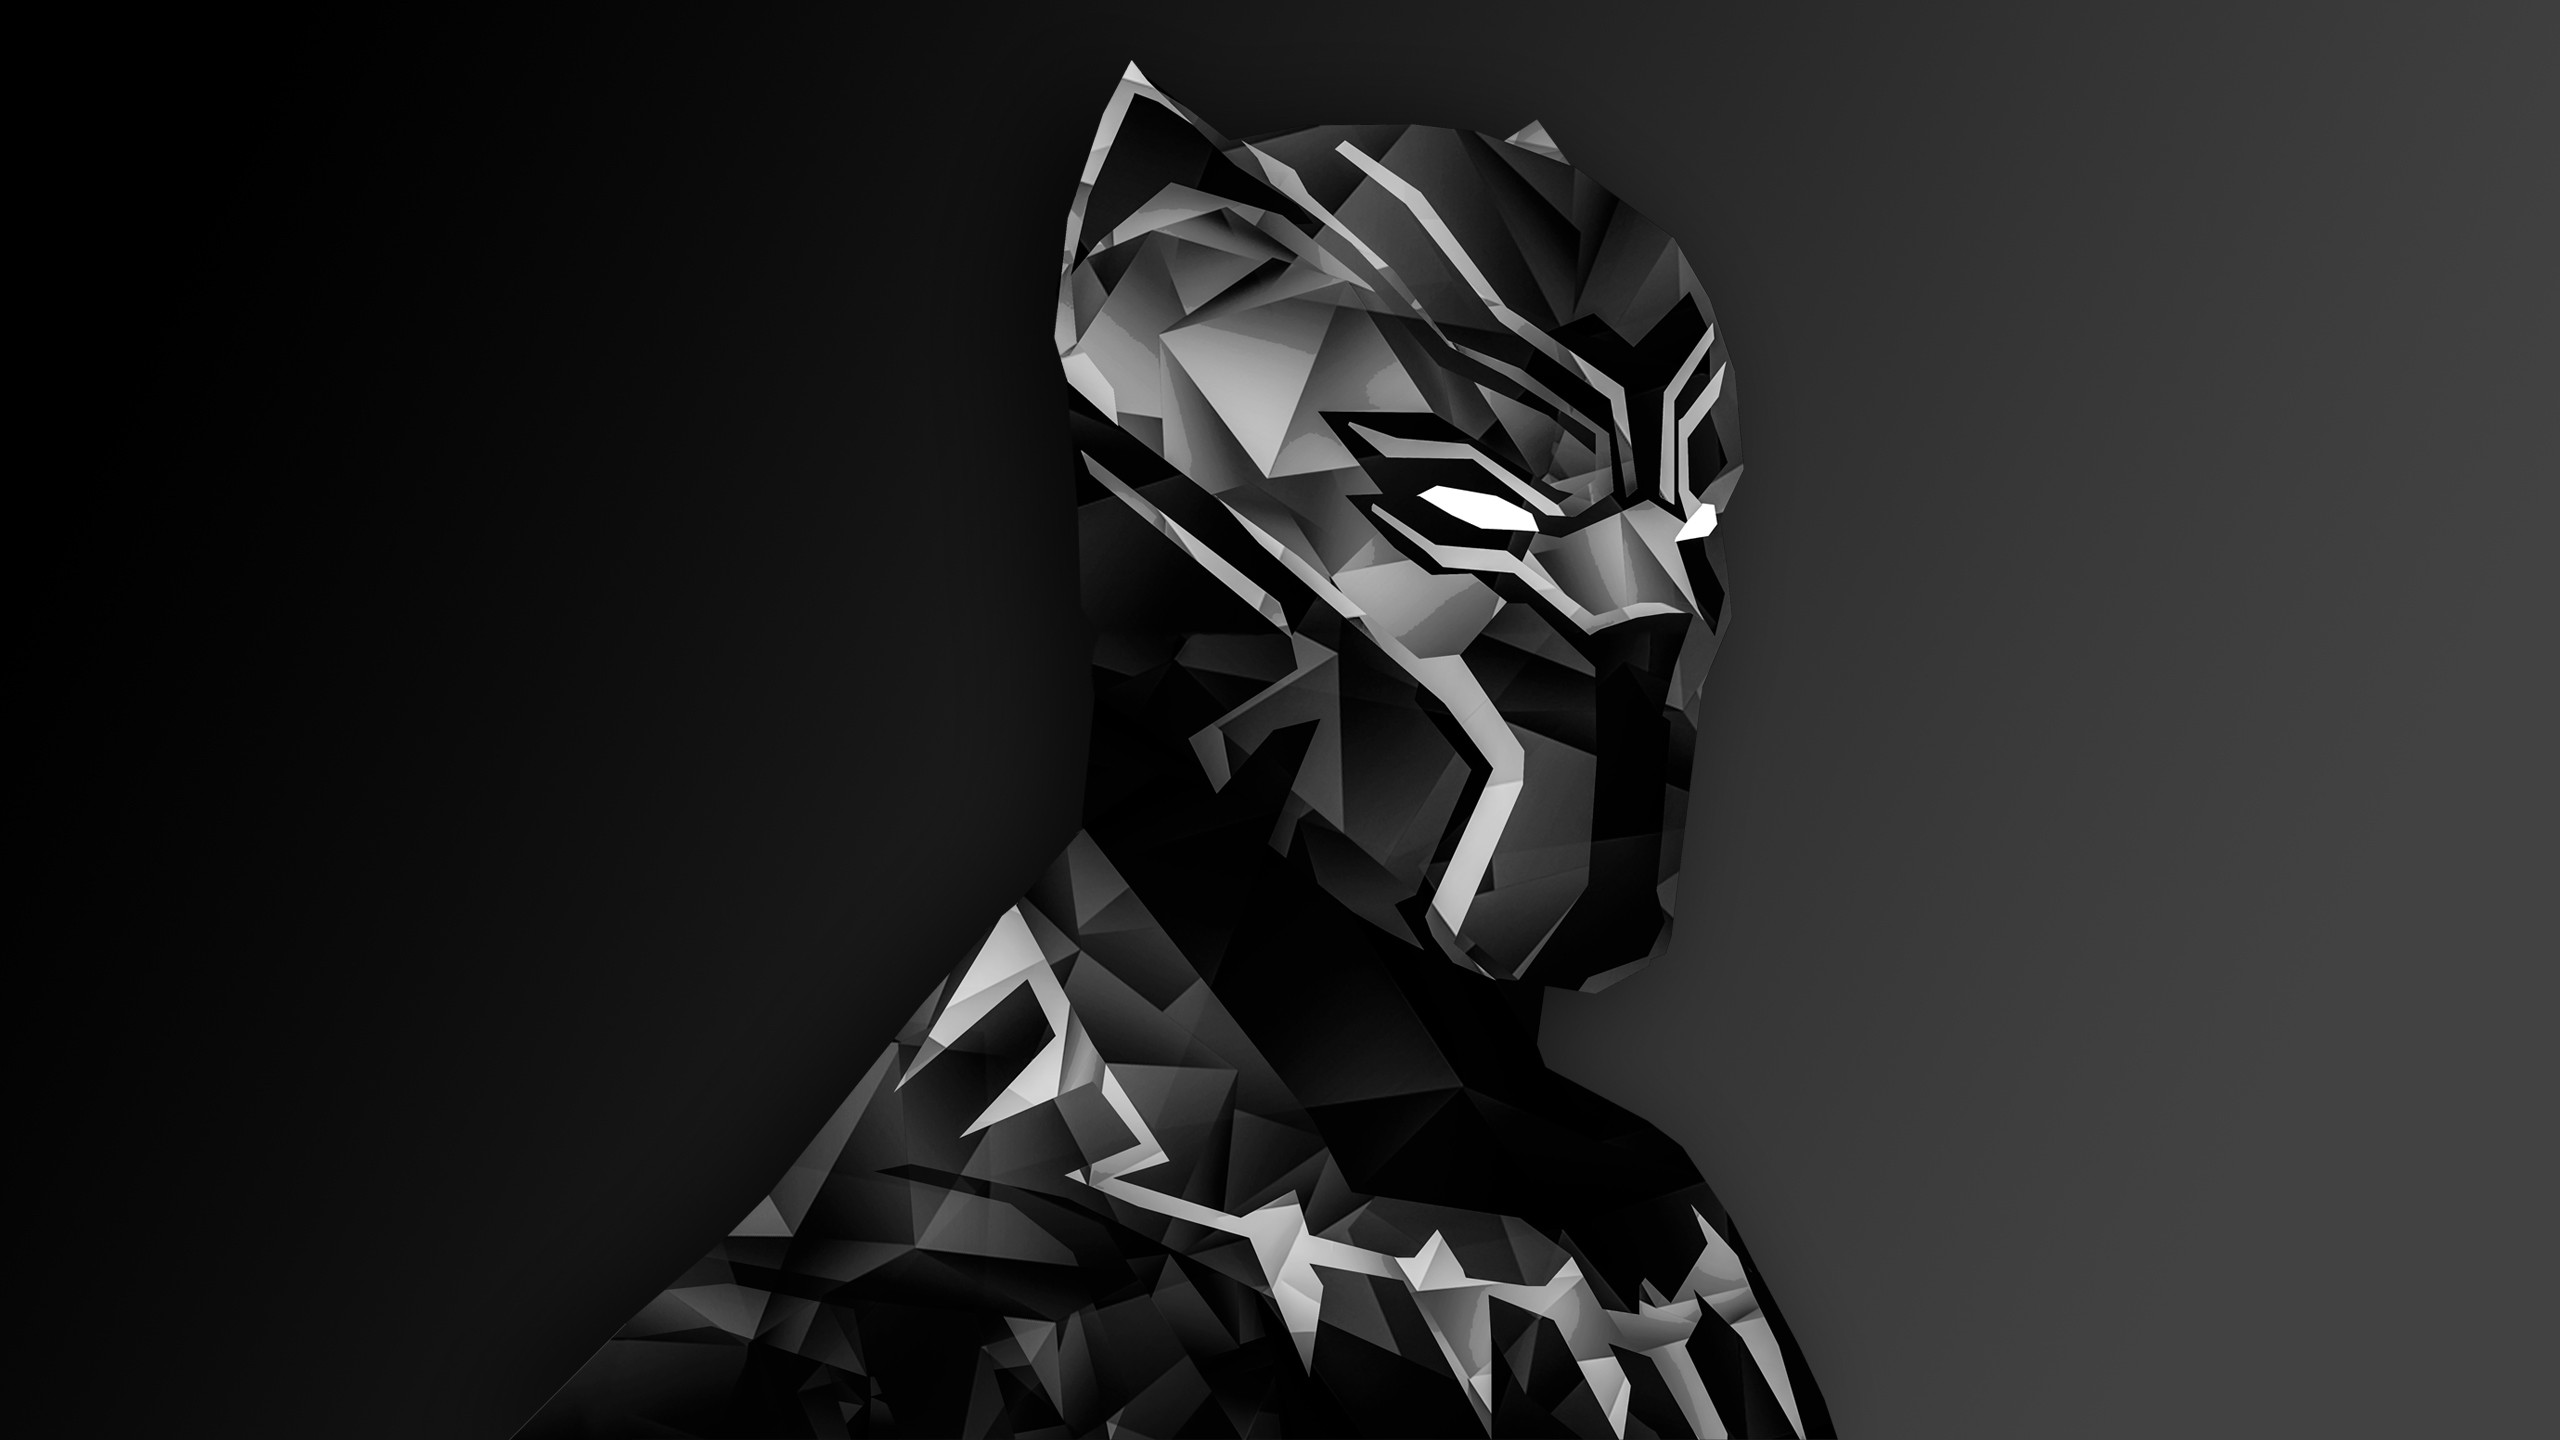 Black Panther Wallpapers, Pictures, Images